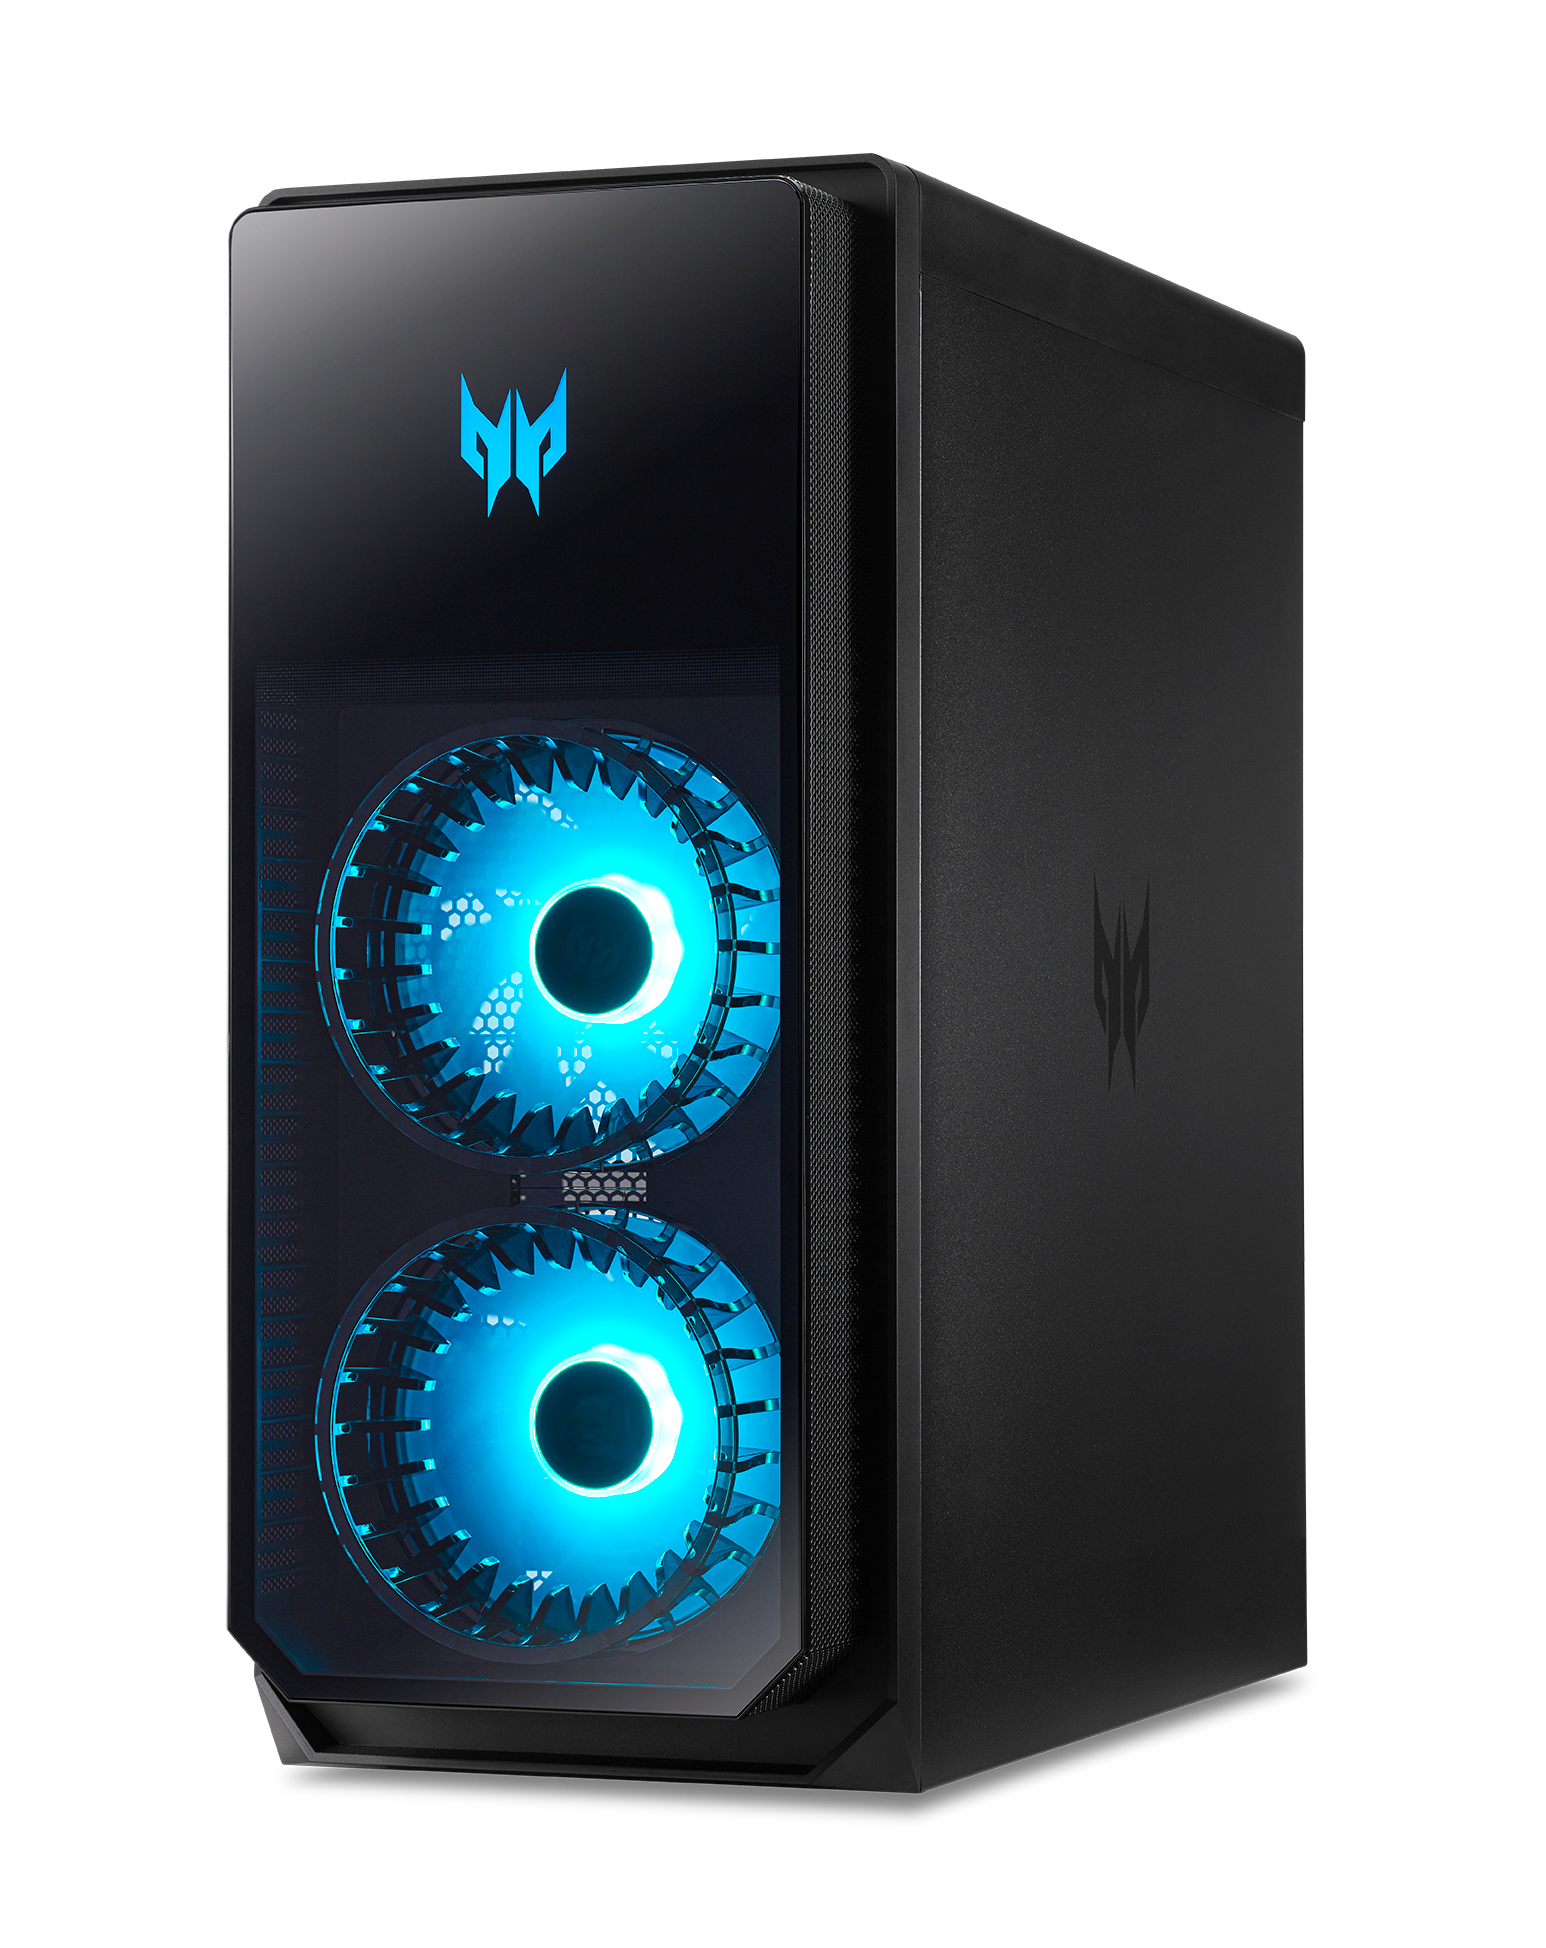 Rent Acer Predator Orion Gaming Desktop - Intel® Core™ i7-12700F - 16GB -  1TB SSD - NVIDIA® GeForce® RTX 3070 from €99.90 per month | alle PCs